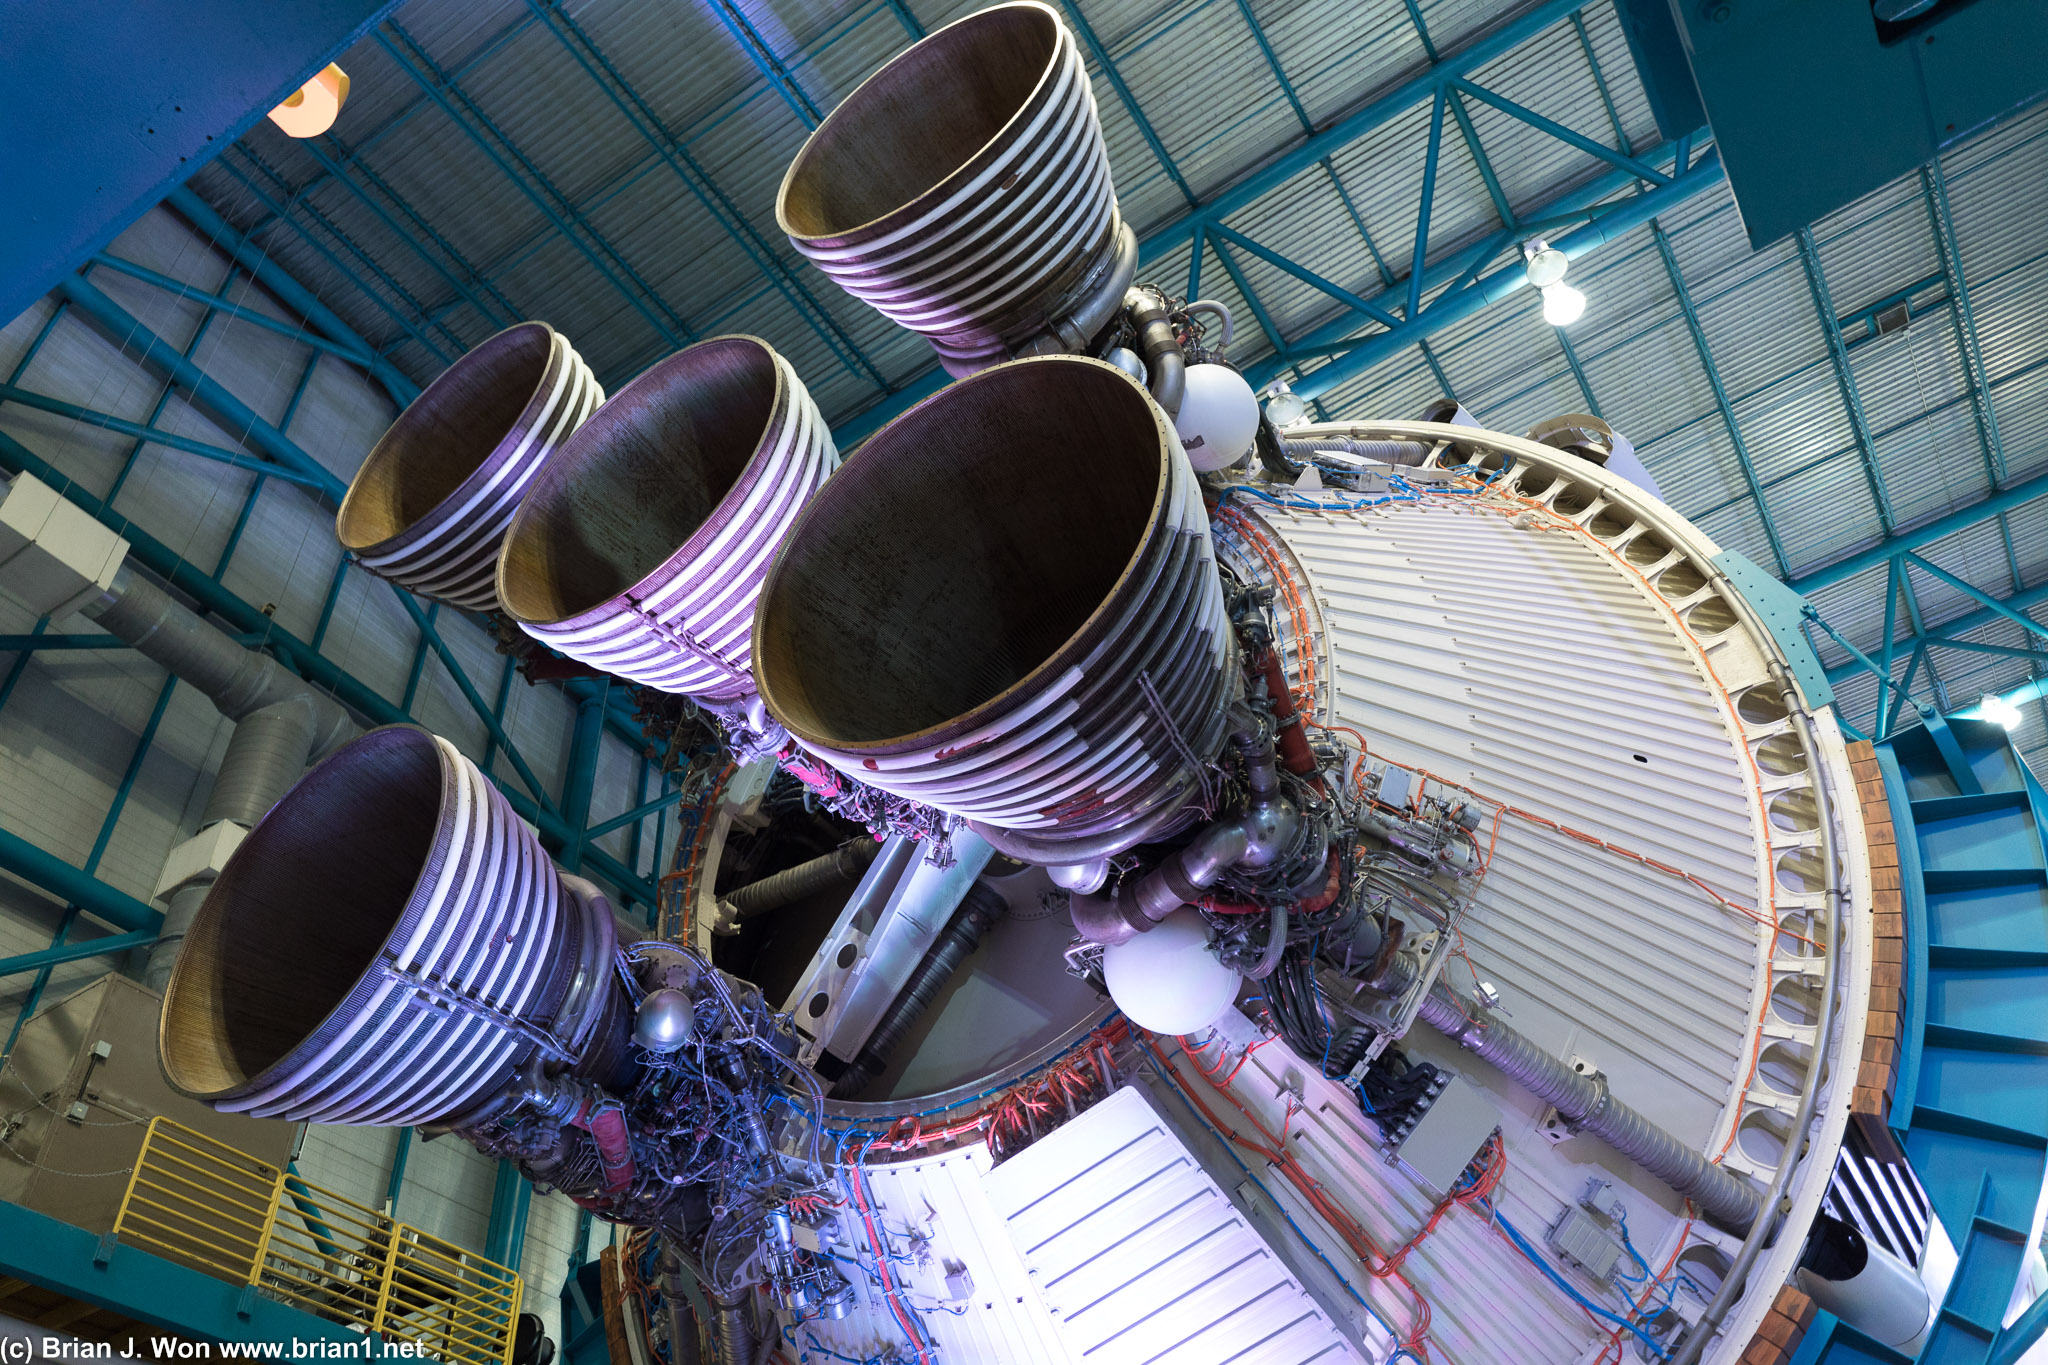 Second stage engines of the Saturn V.